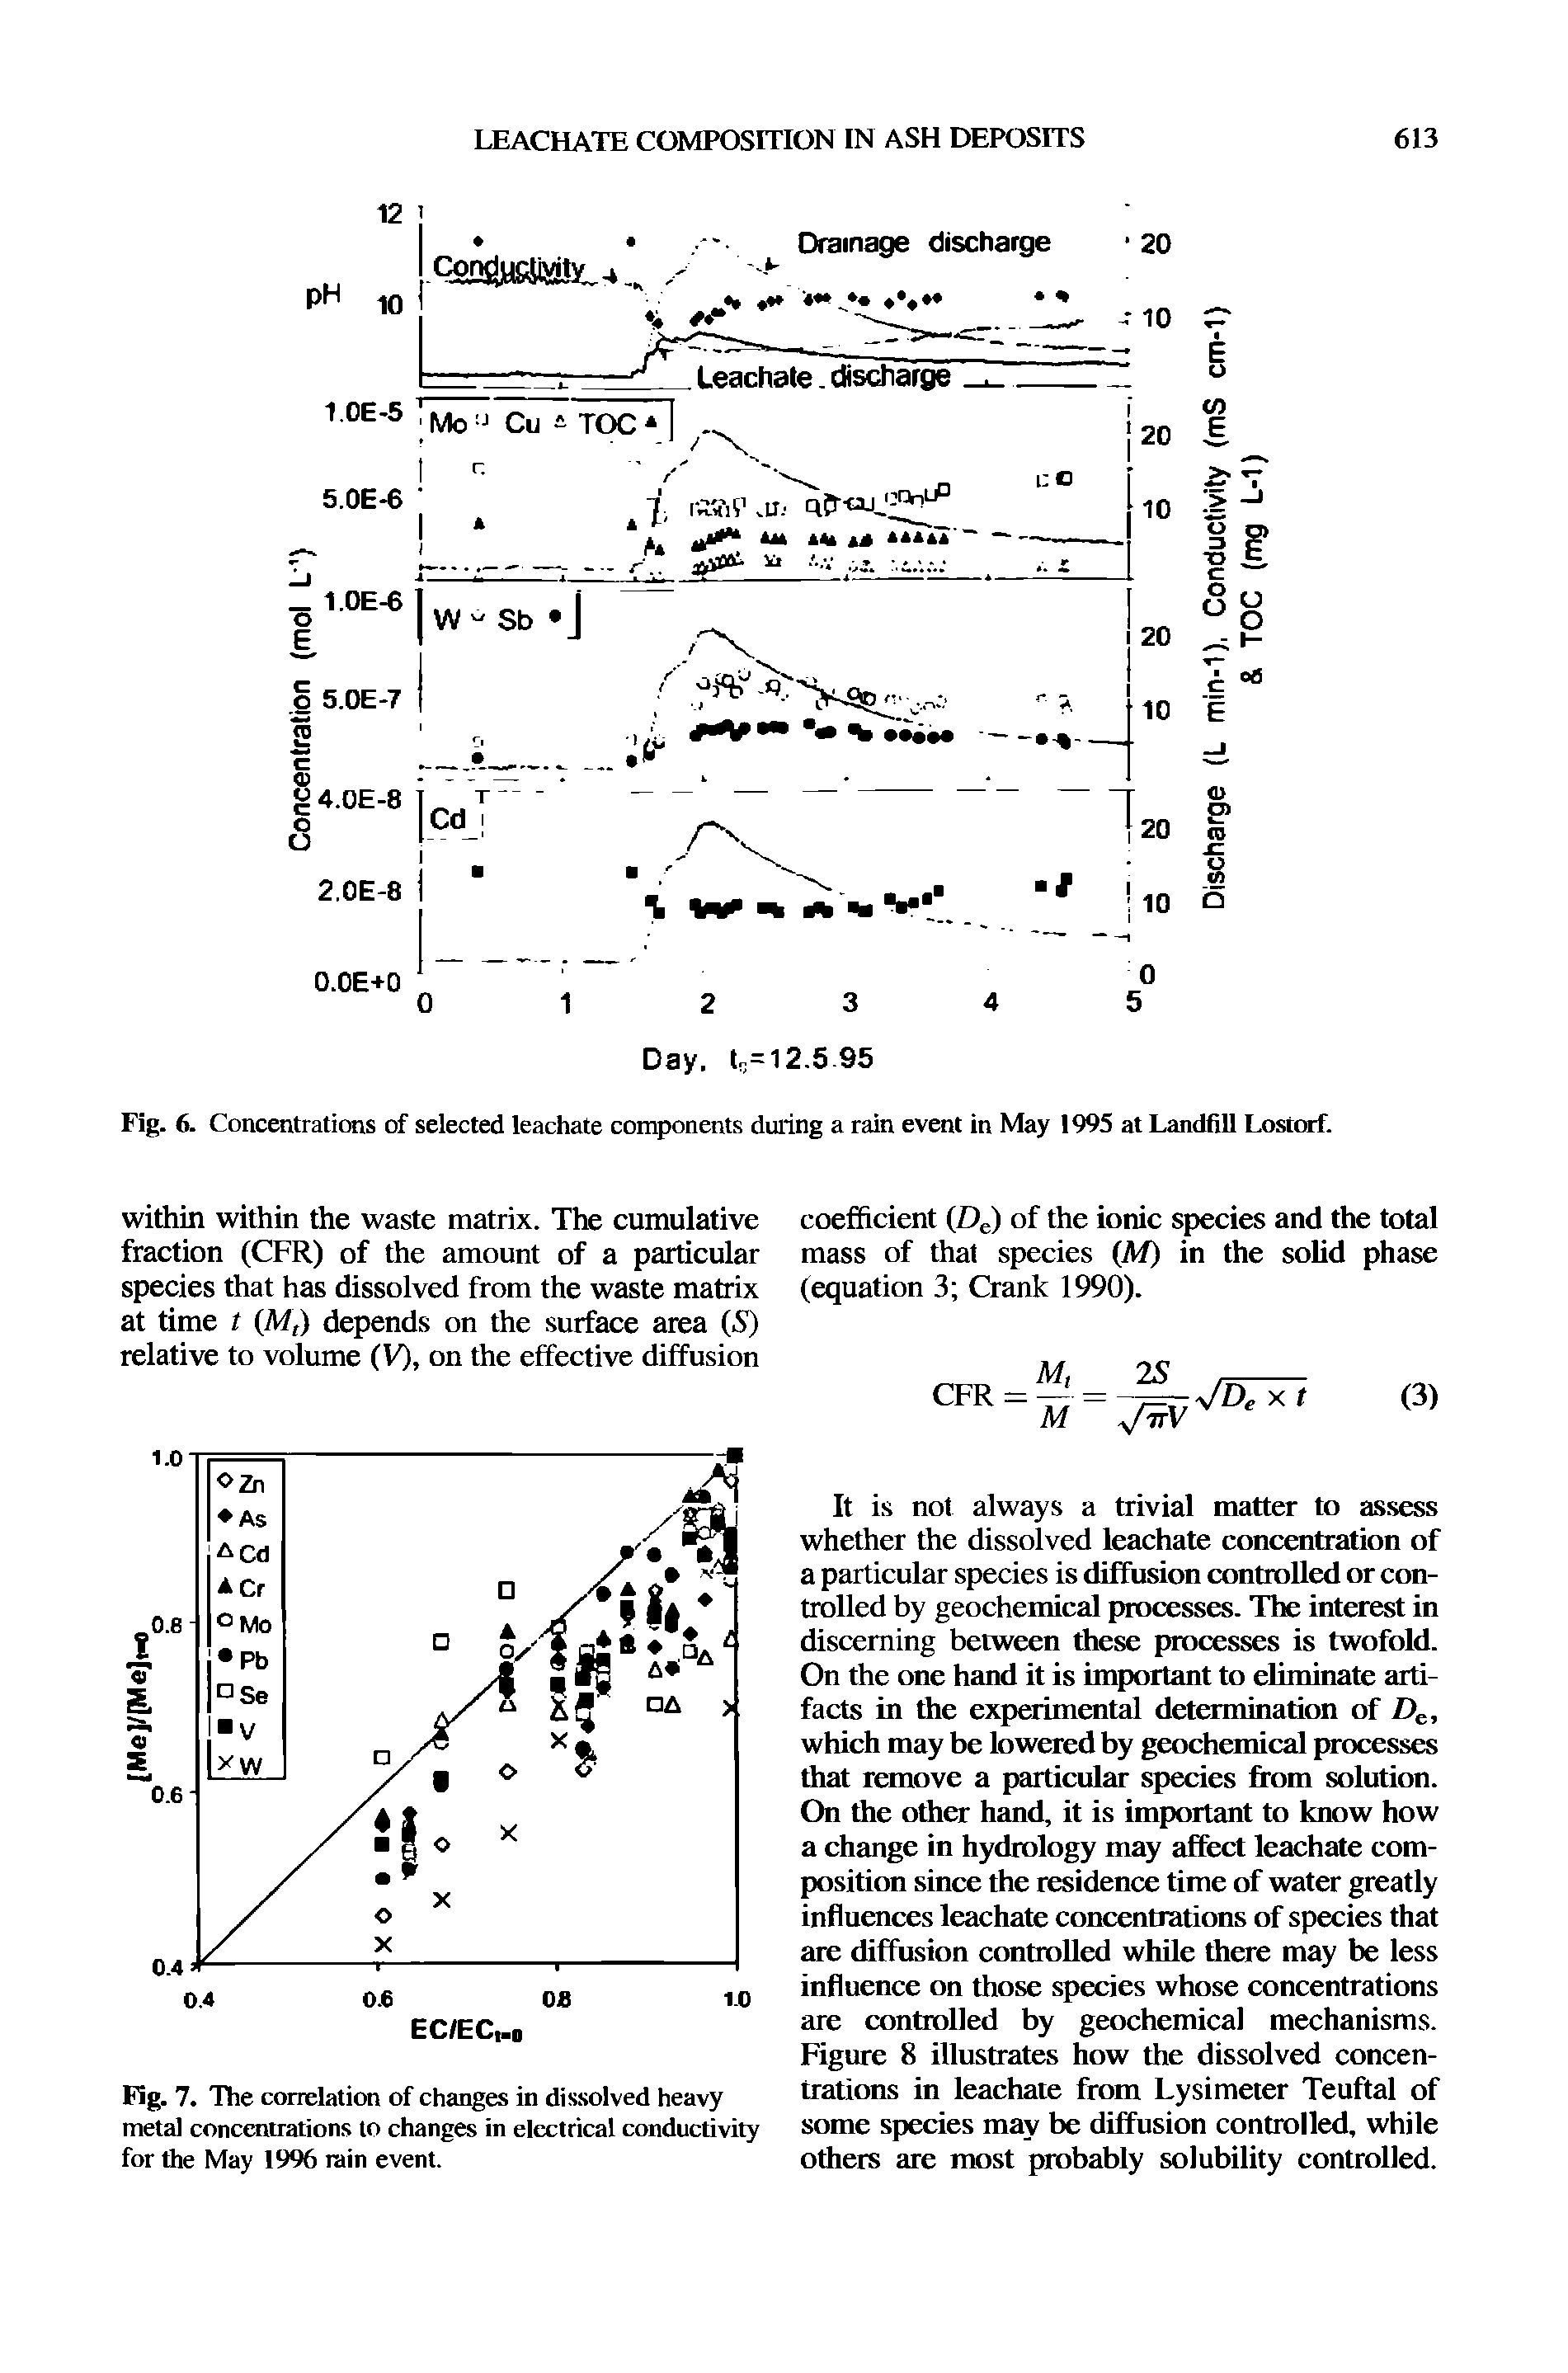 Fig. 7. The correlation of changes in dissolved heavy metal concentrations to changes in electrical conductivity for the May 1996 rain event.